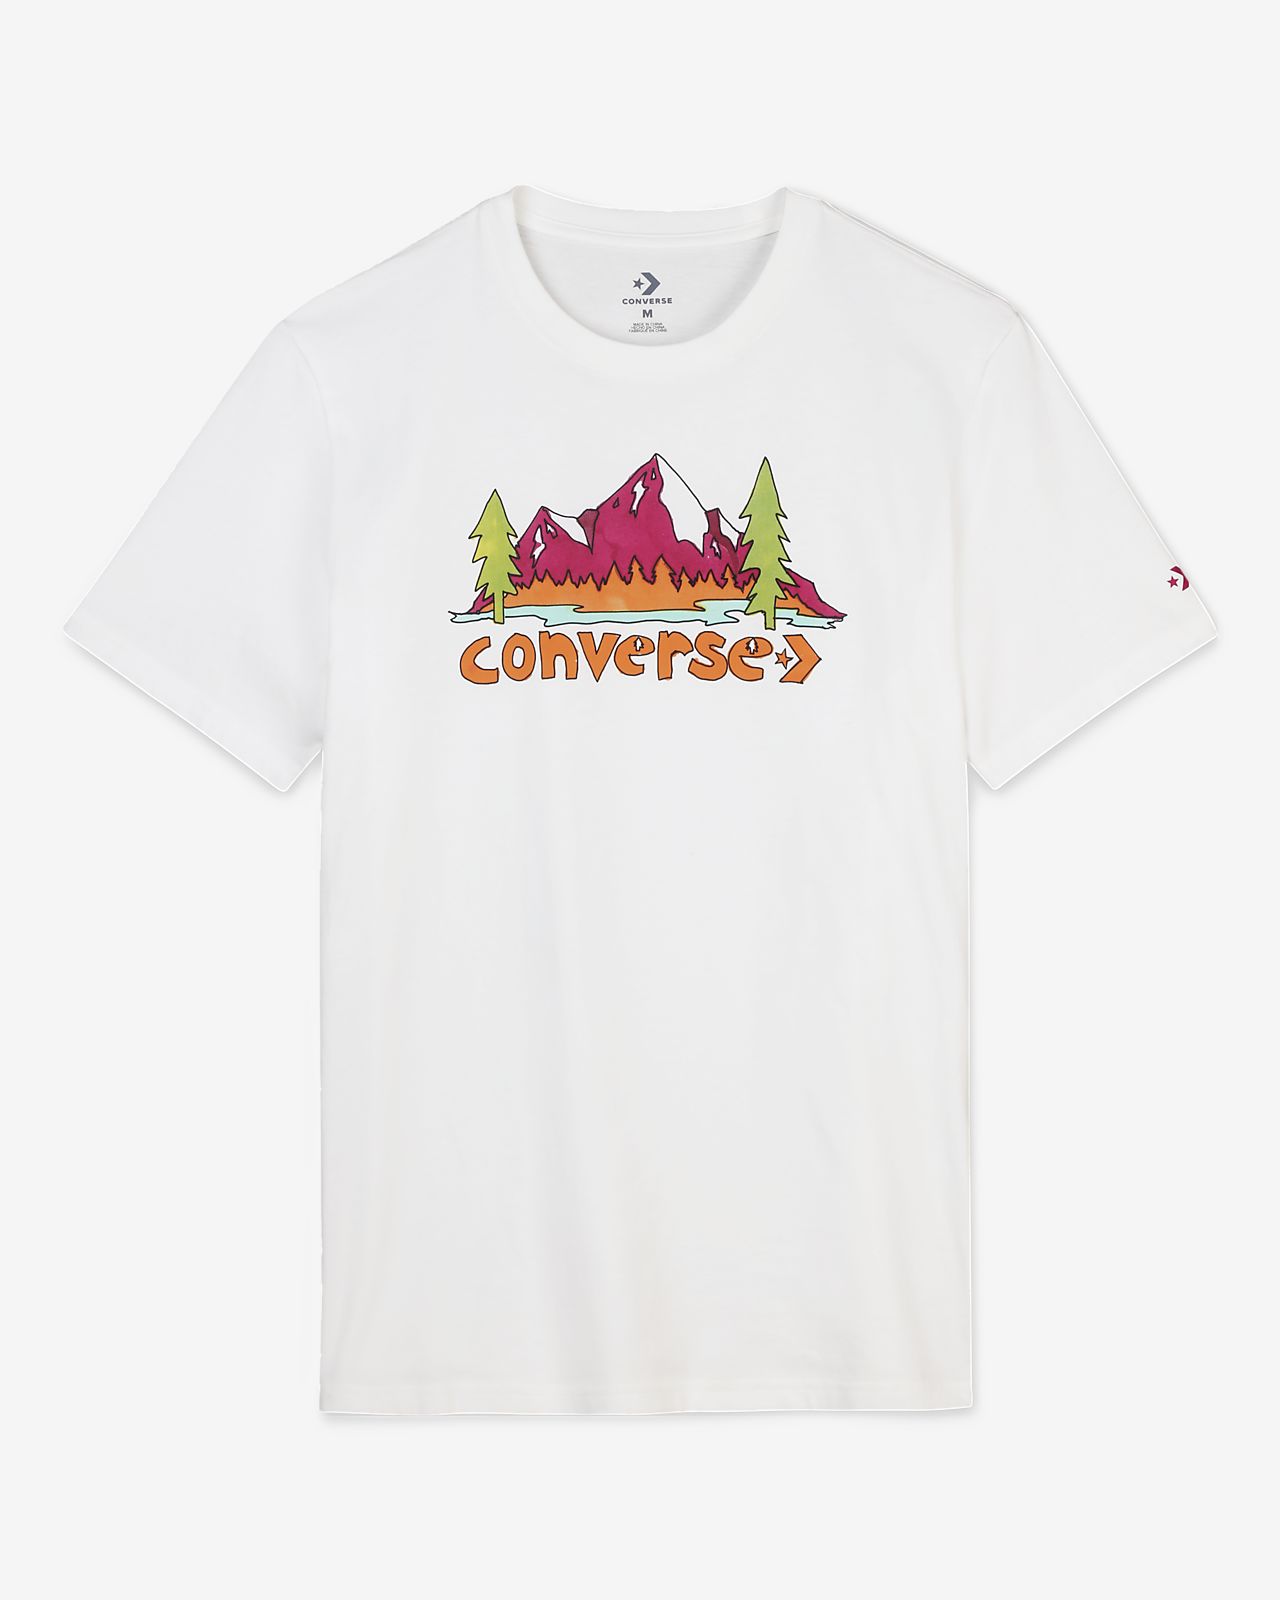 converse t shirts in india